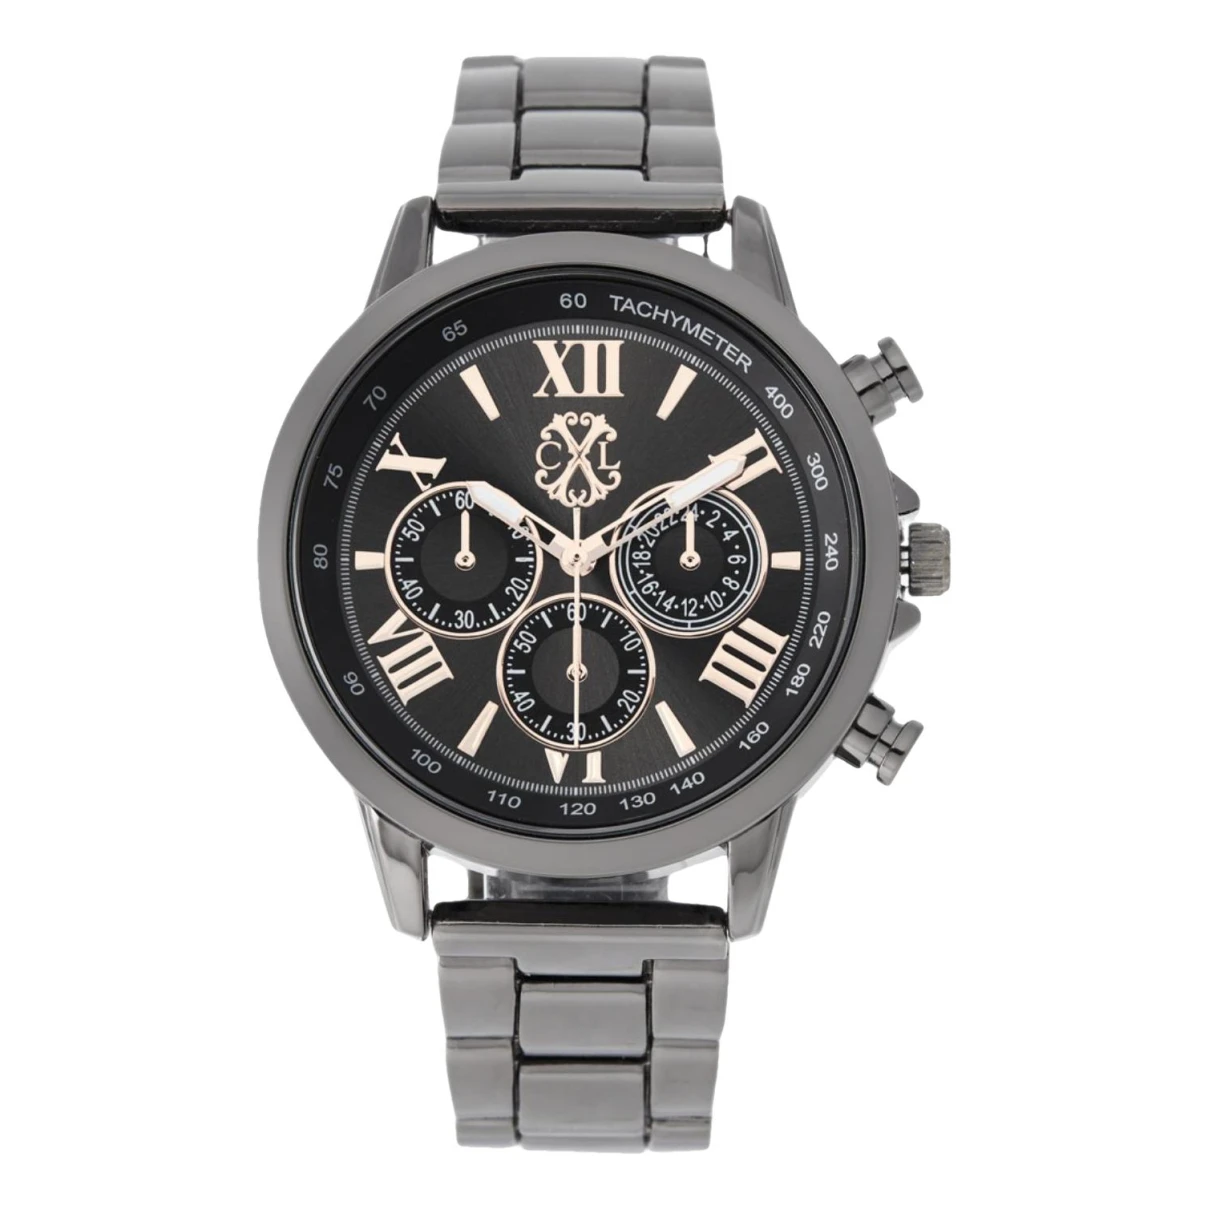 Pre-owned Christian Lacroix Watch In Black